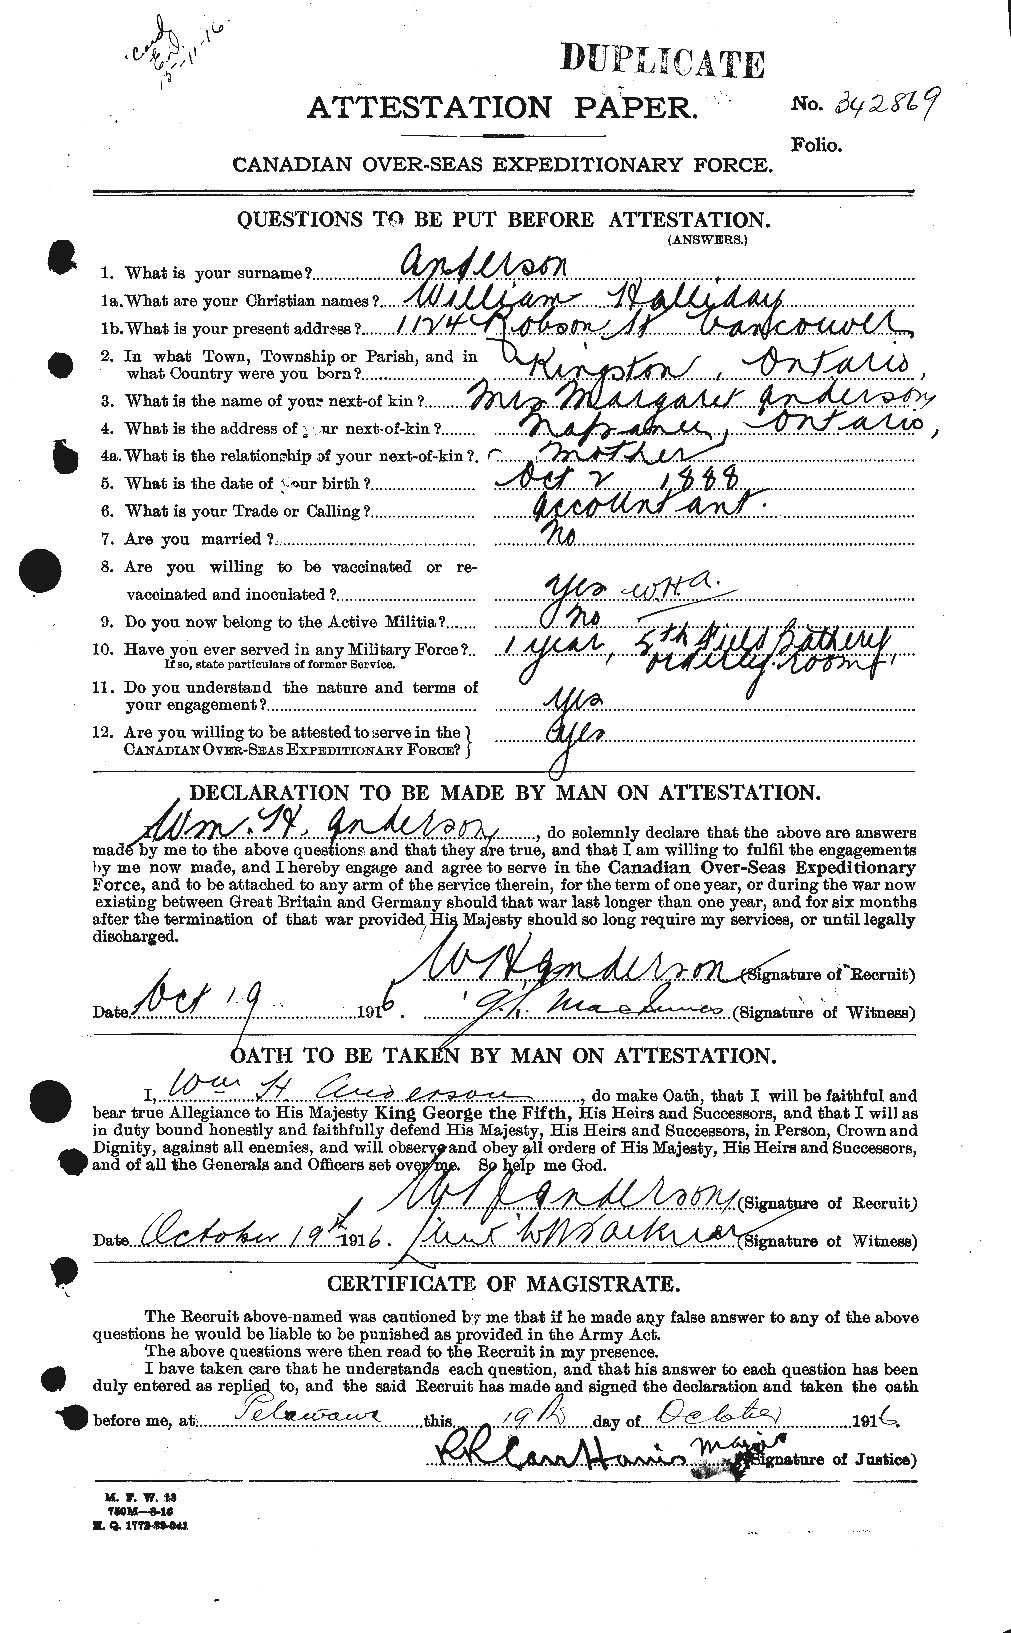 Personnel Records of the First World War - CEF 210798a